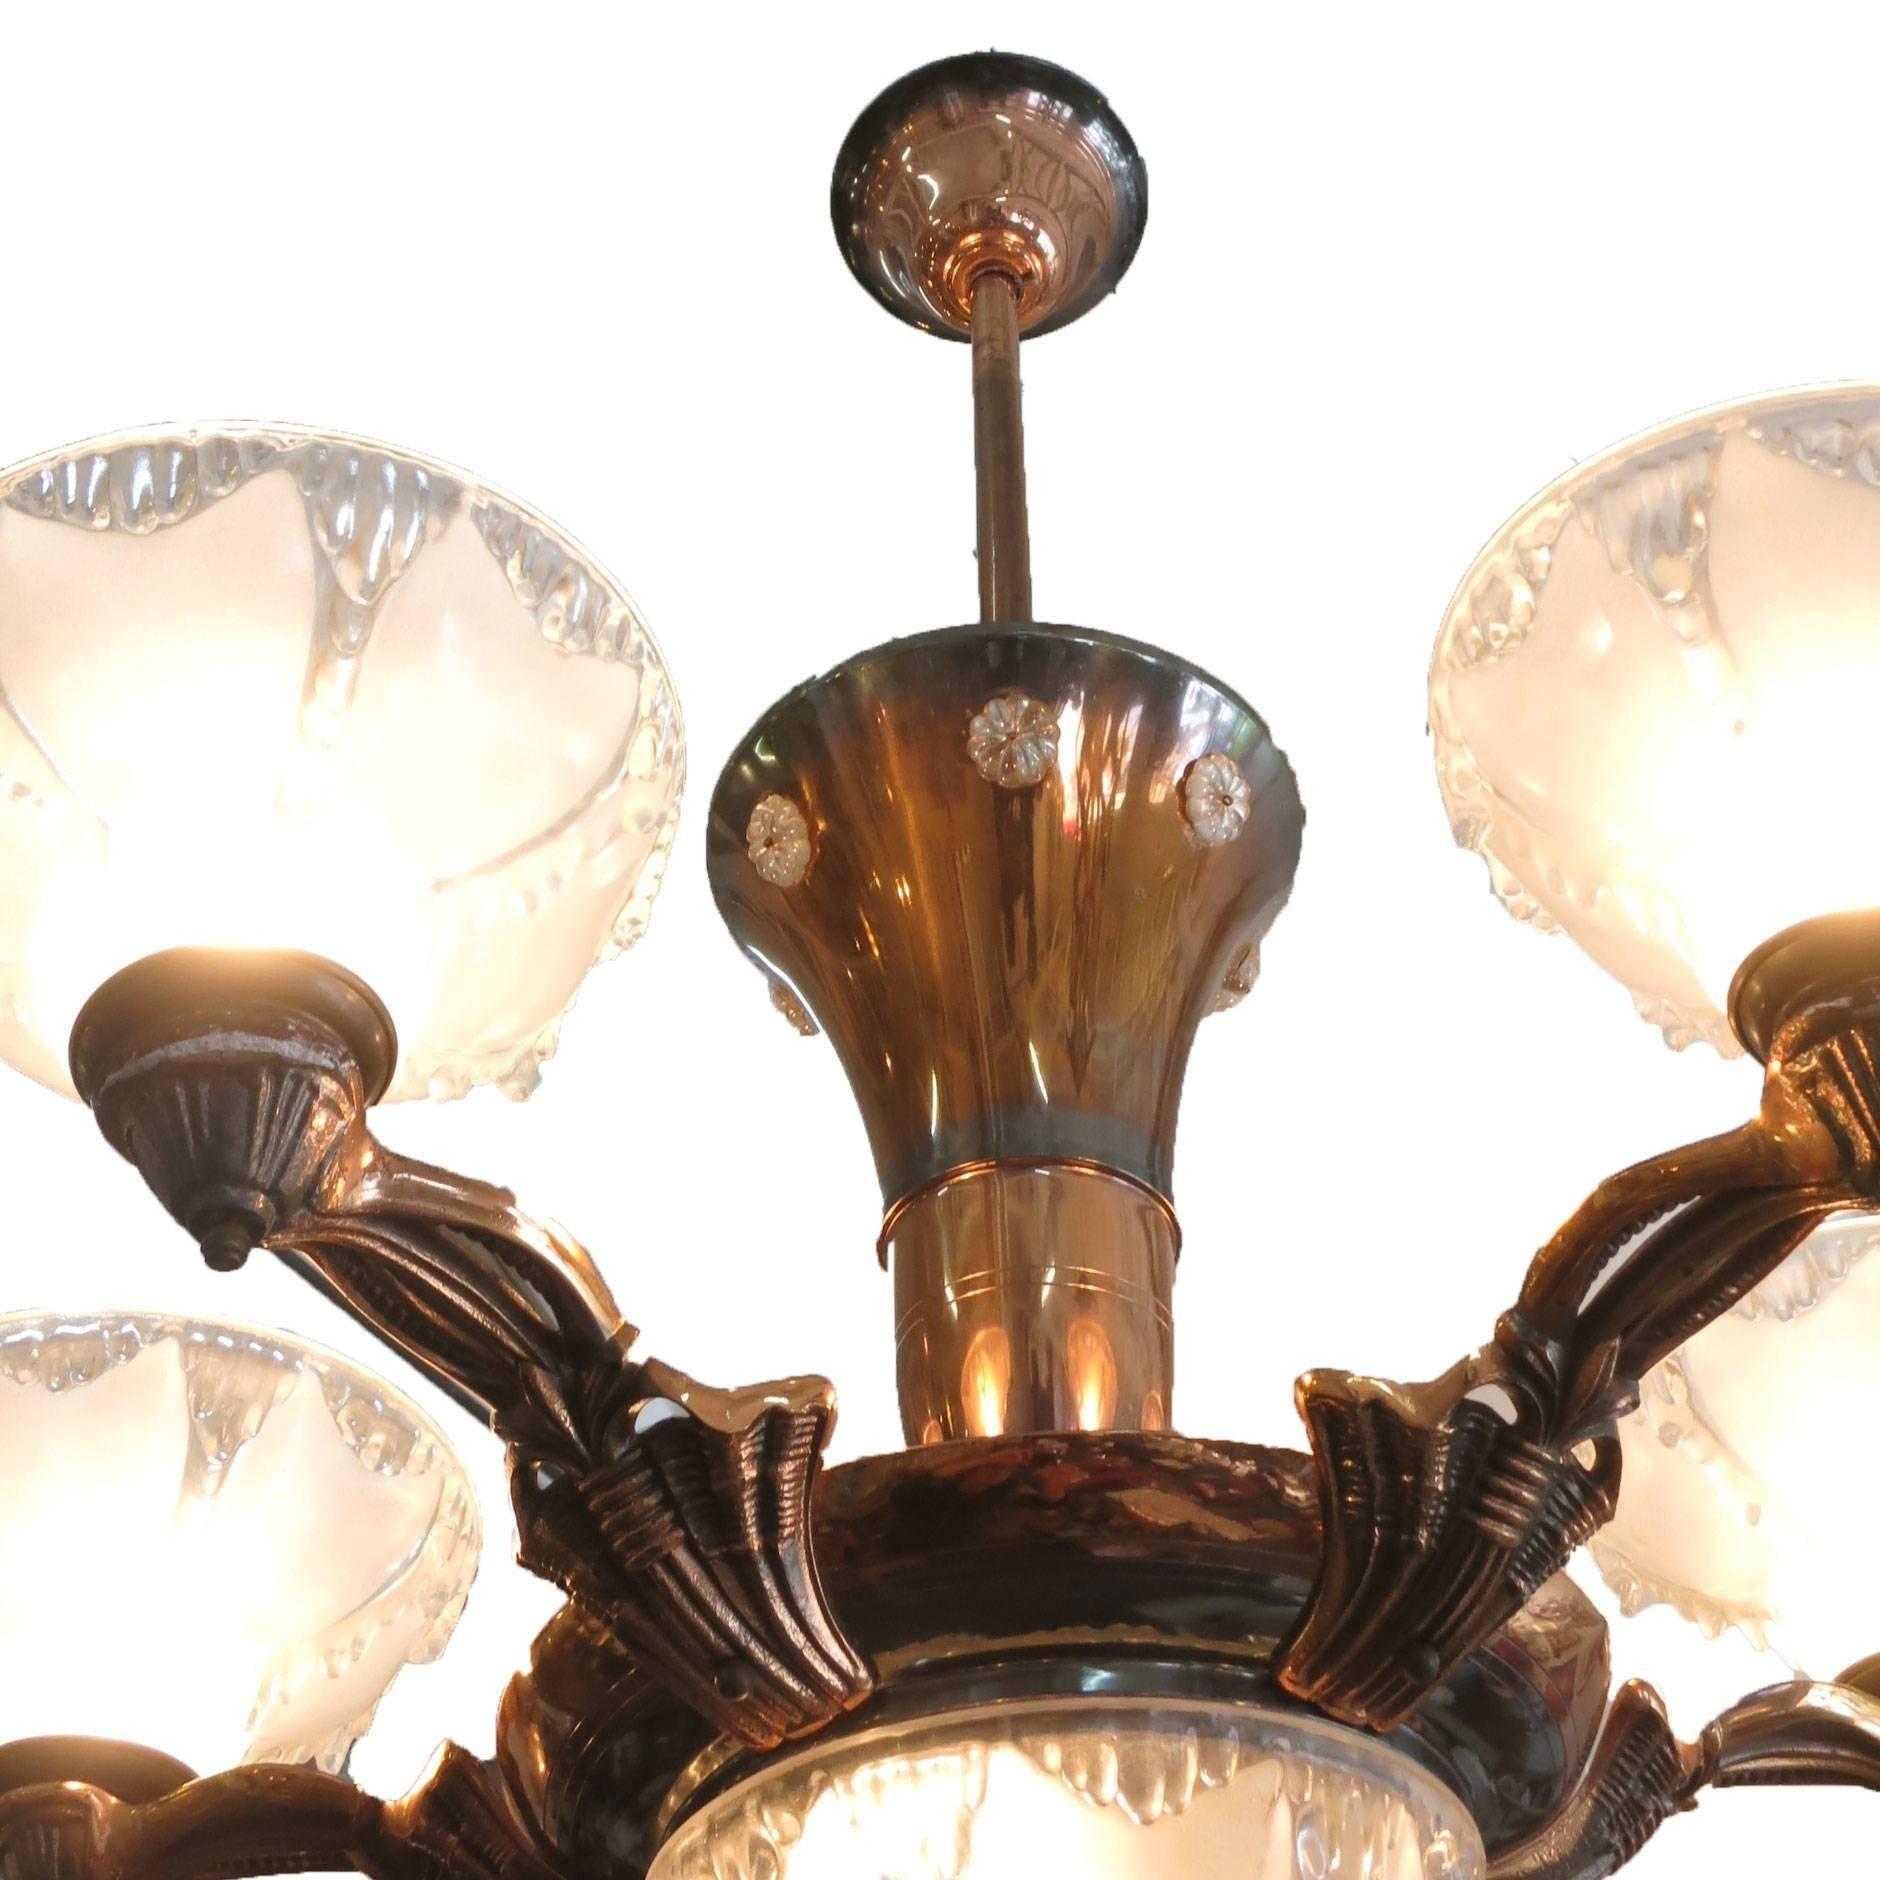 This French Art Deco copper chandelier comes with a five-arm design each containing frosted molded glass shades made by Ezan. The chandelier features a copper body featuring a center cylinder that branches out to 5 arms with an overhead dome for 6